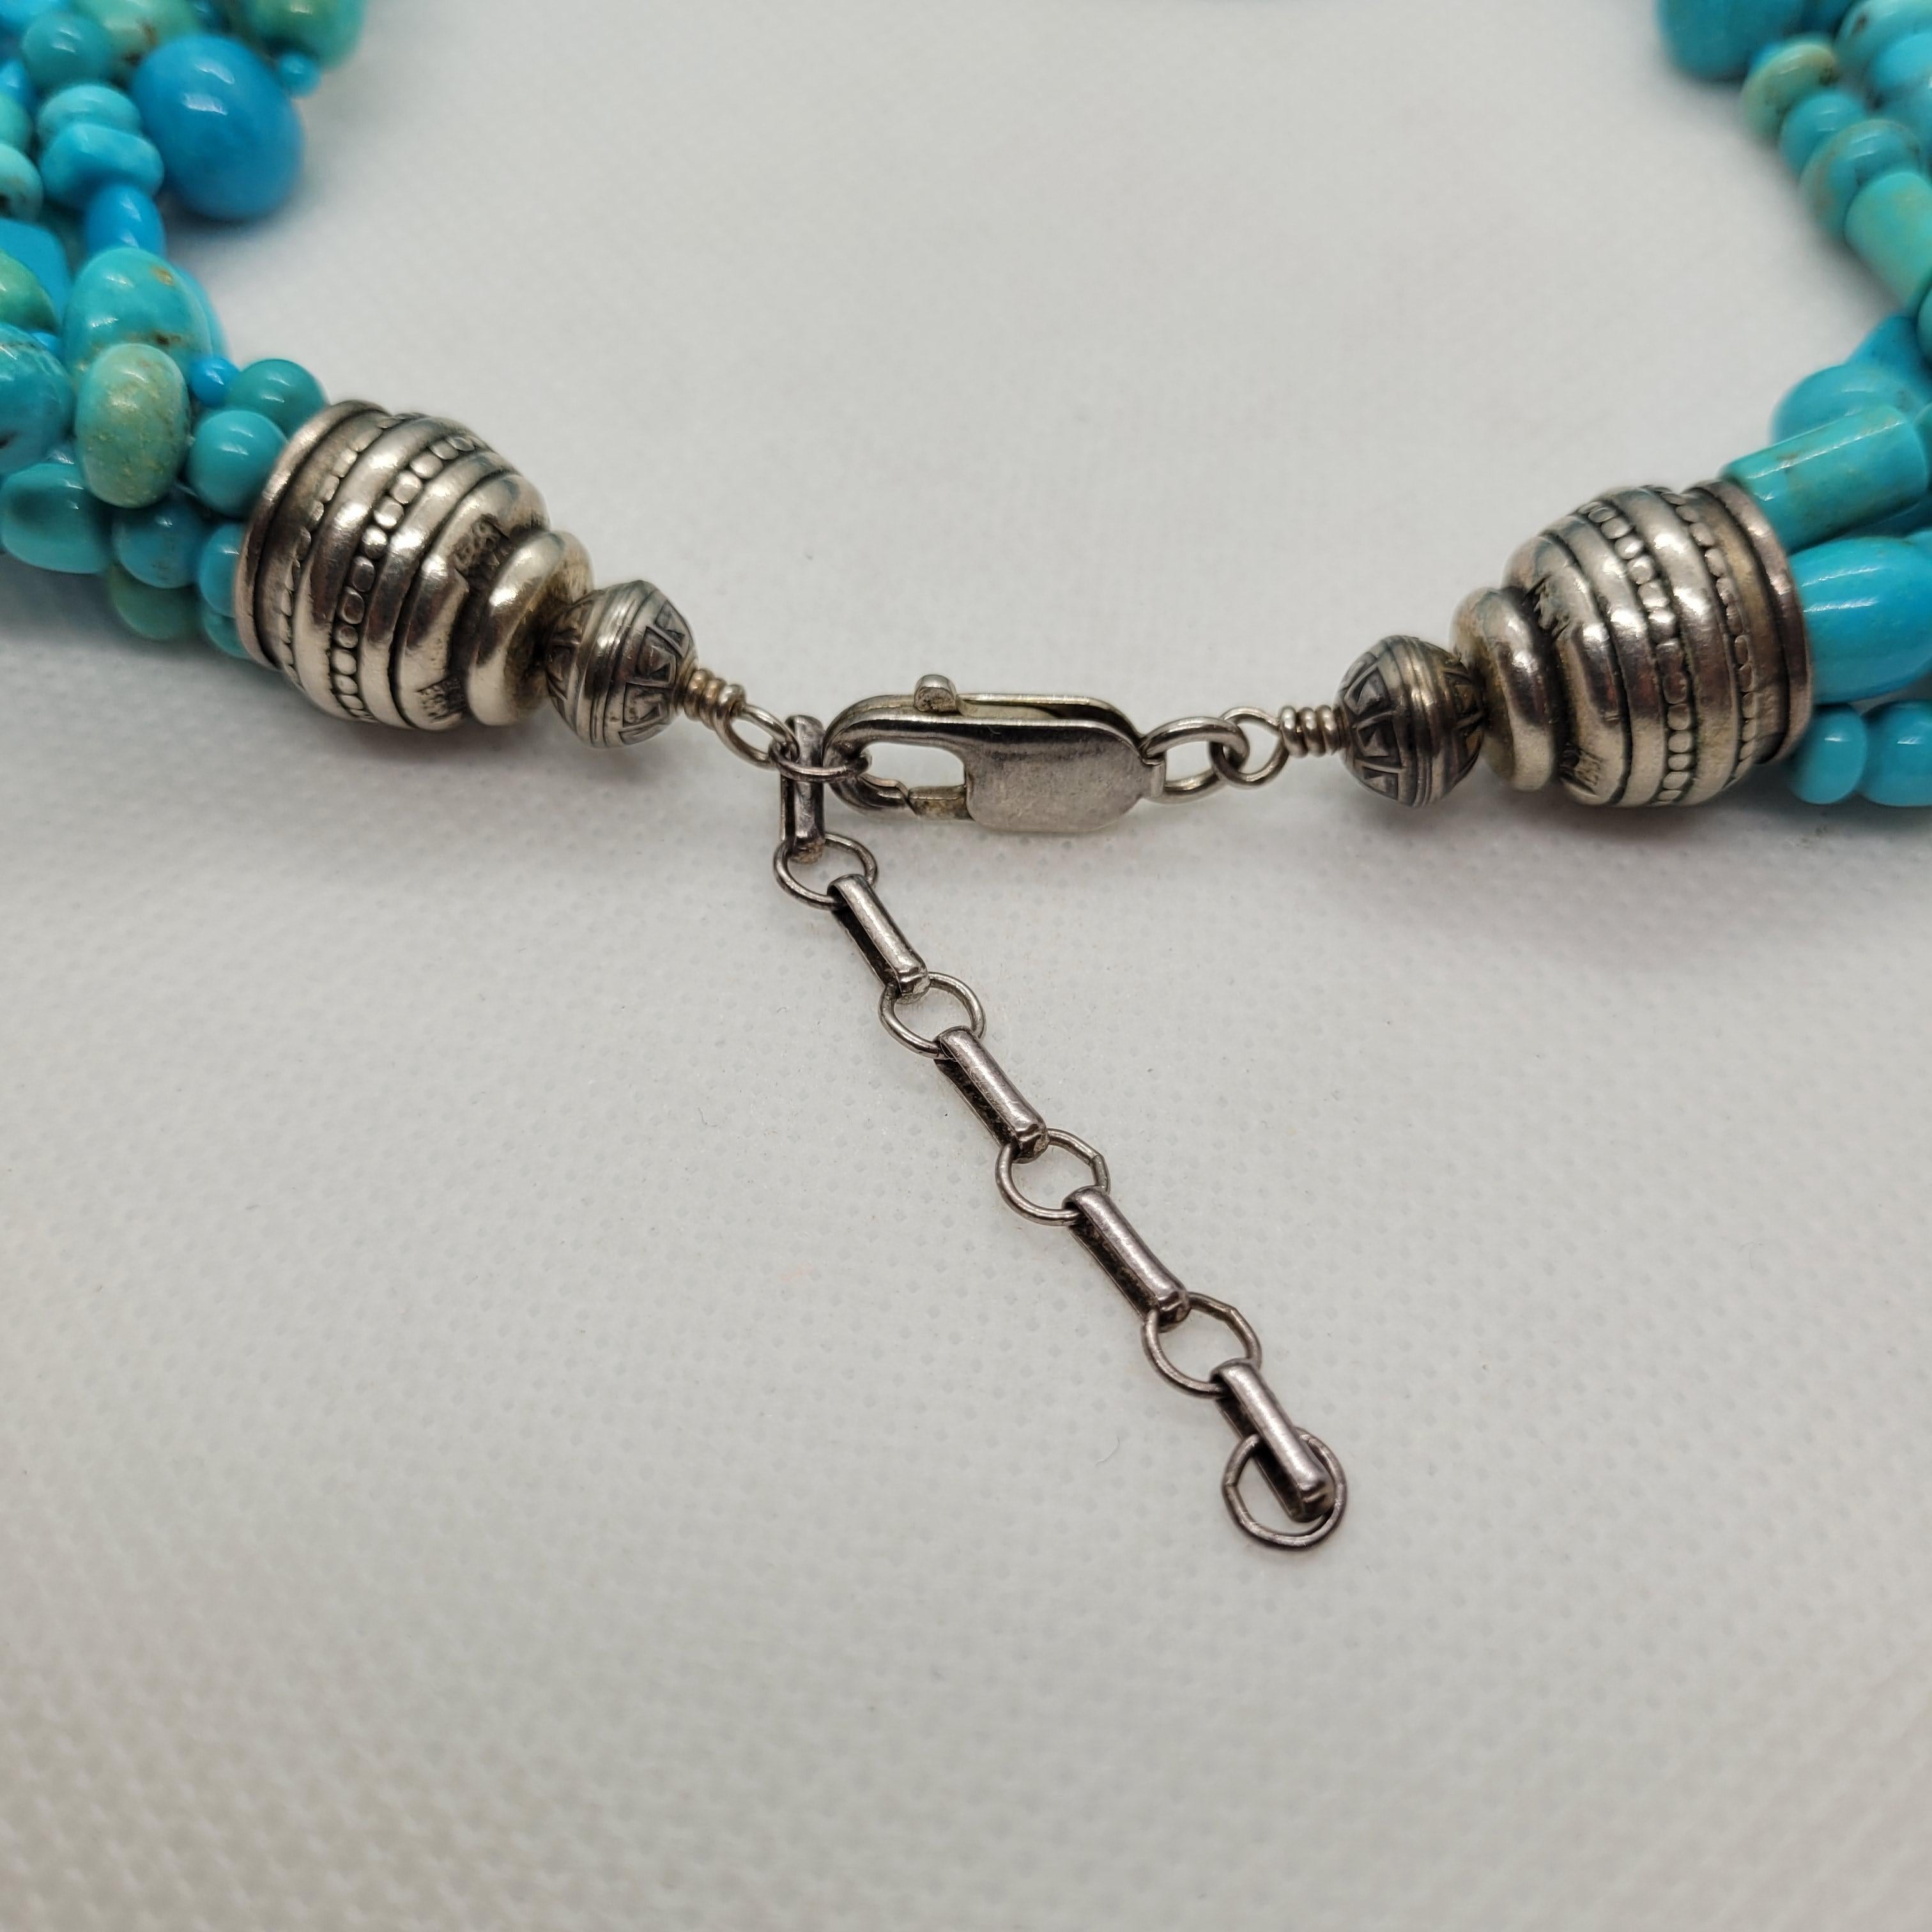 Modern Multi-Strand Turquoise Necklace, Designer Silver Lobster Clasp, 5 Strand